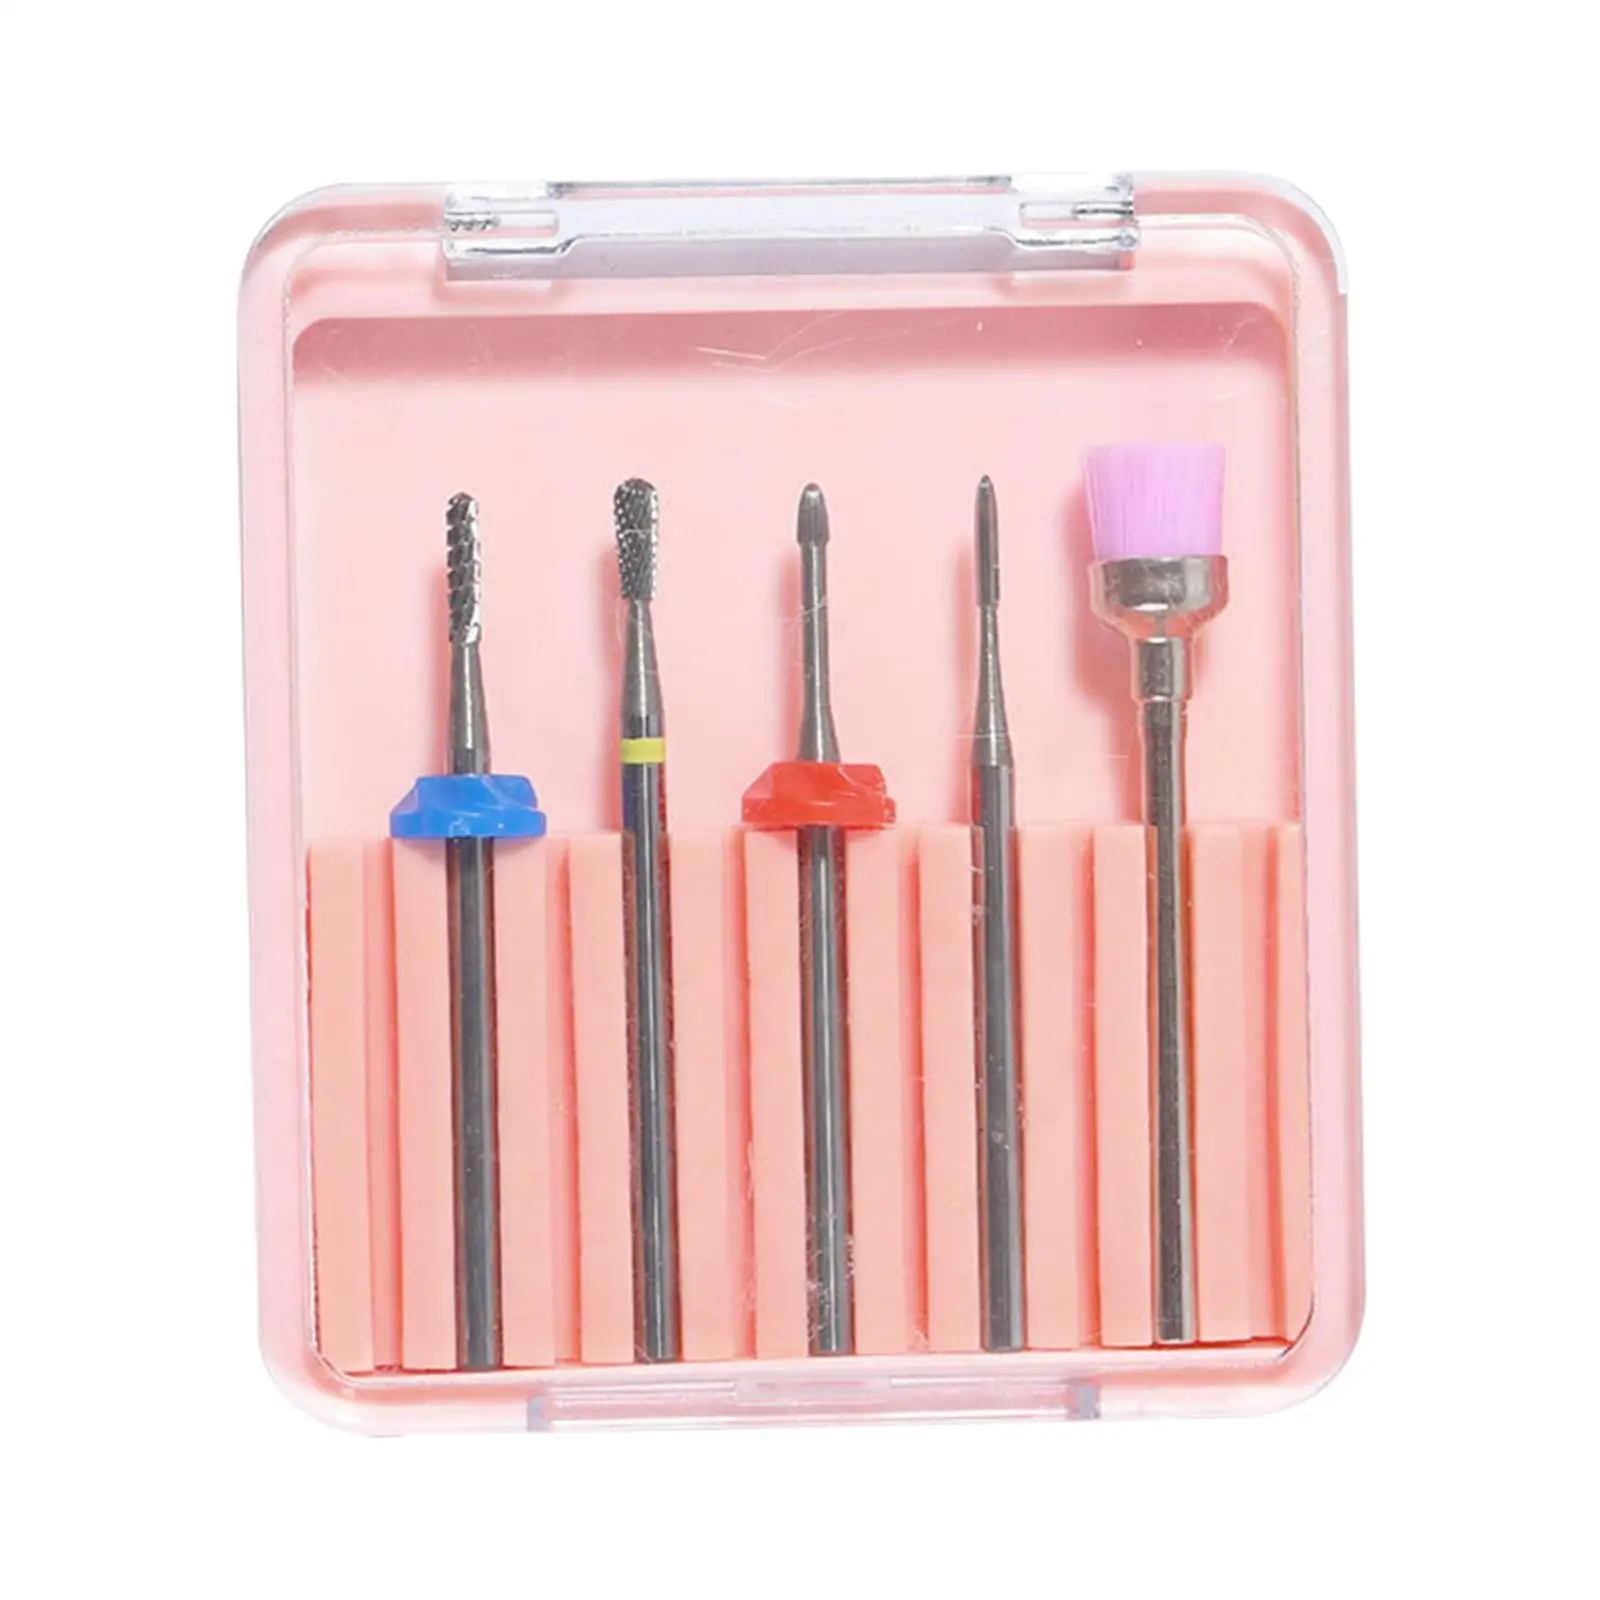 5pcs  Bits Tungsten Steel Ceramics for Remove /Polishing Poly Acrylic Nails Cuticles Manicure Pedicure Home Use 